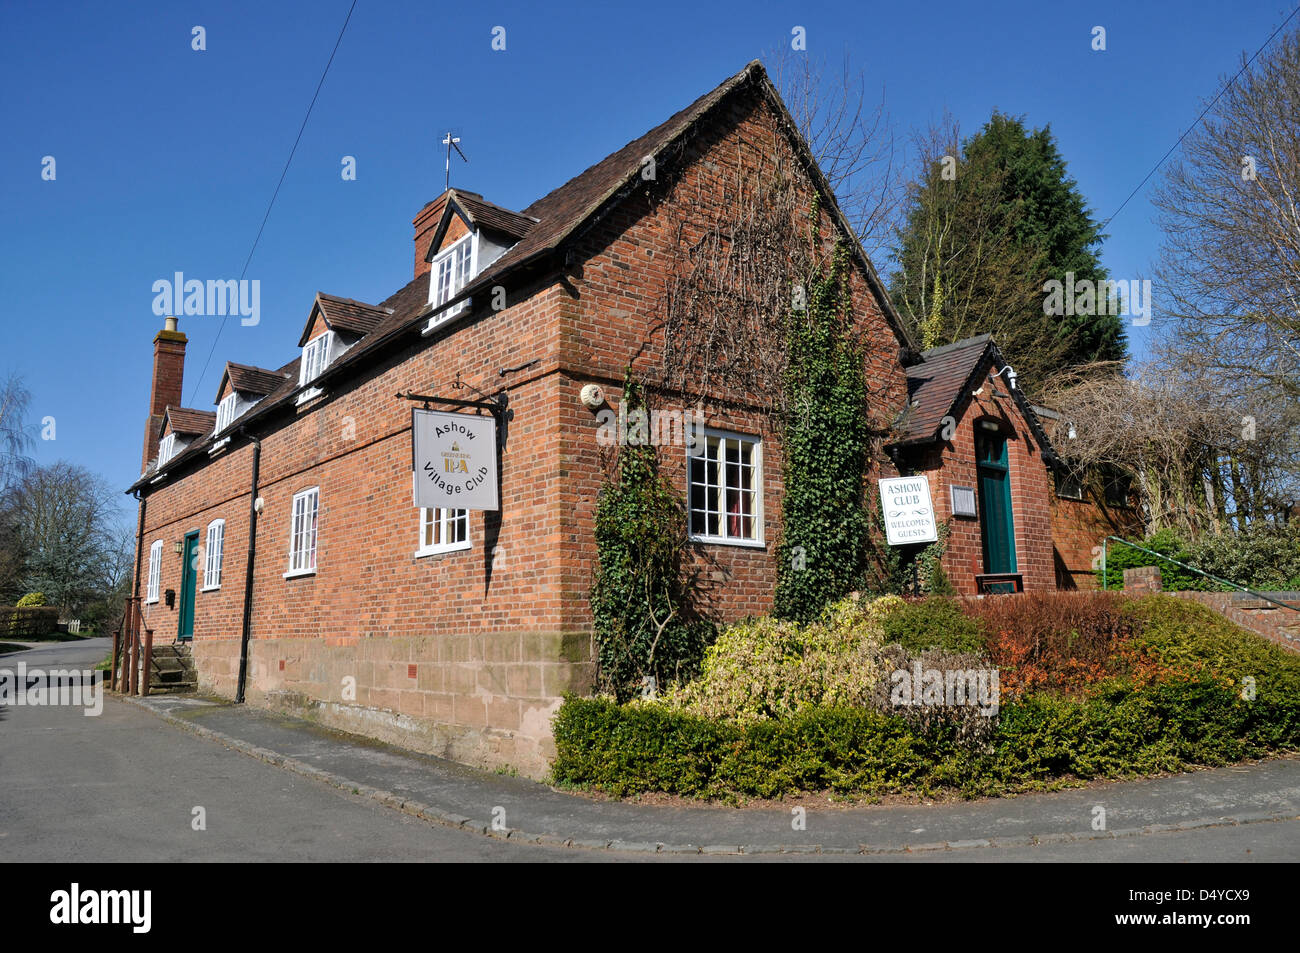 The local village hall in Ashow, Warwickshire. Stock Photo